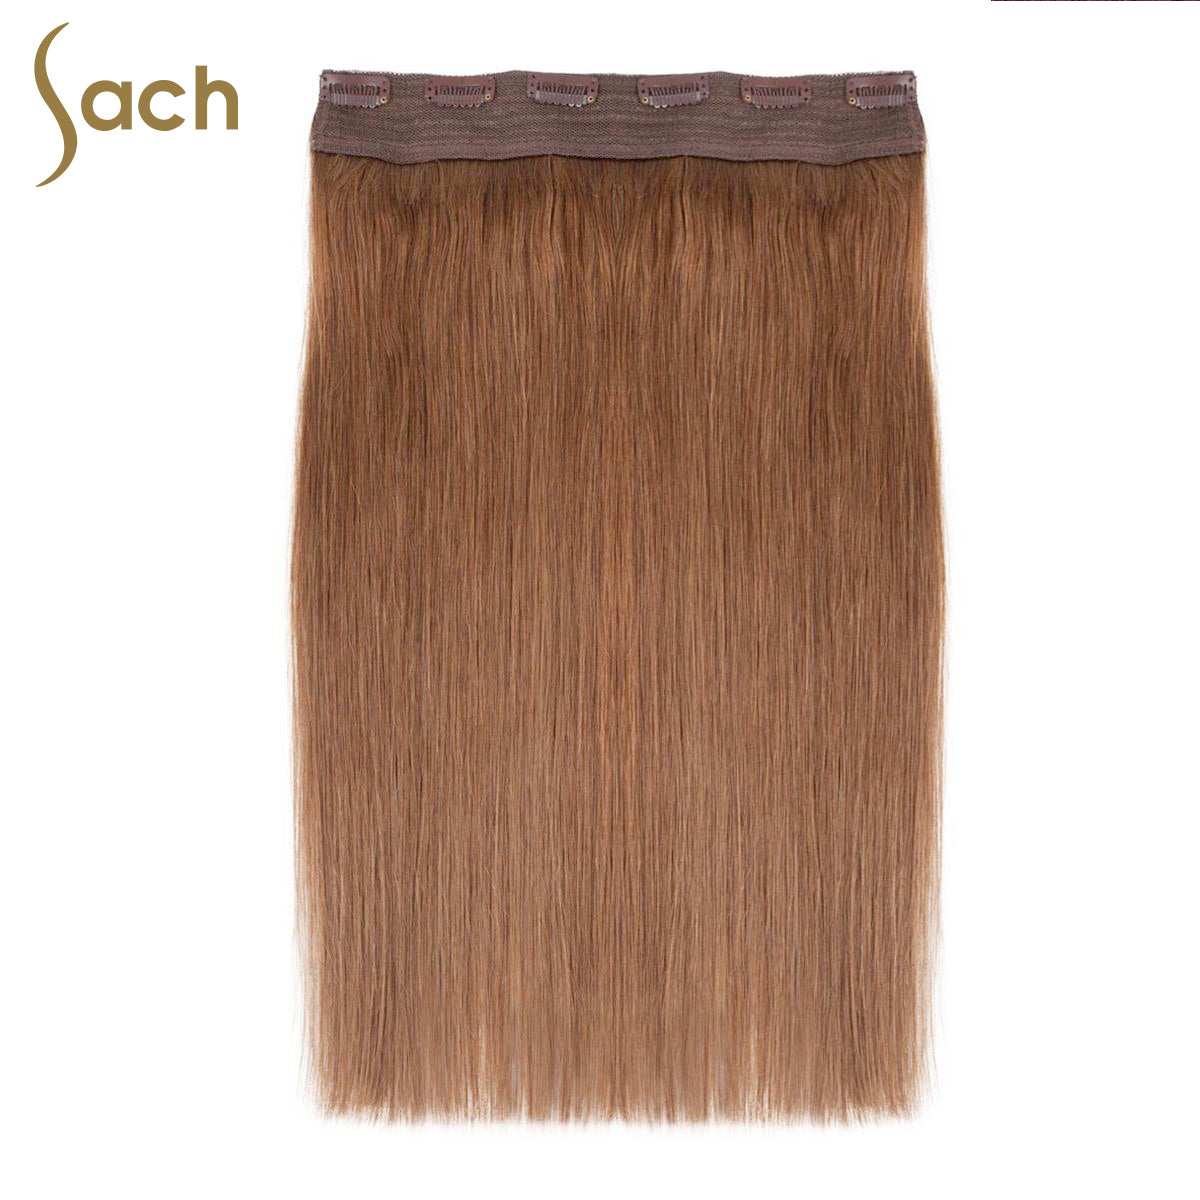 V-Shape Clip In Human Hair Extensions One Piece Weft 3/4 Full Head Thick  16-20